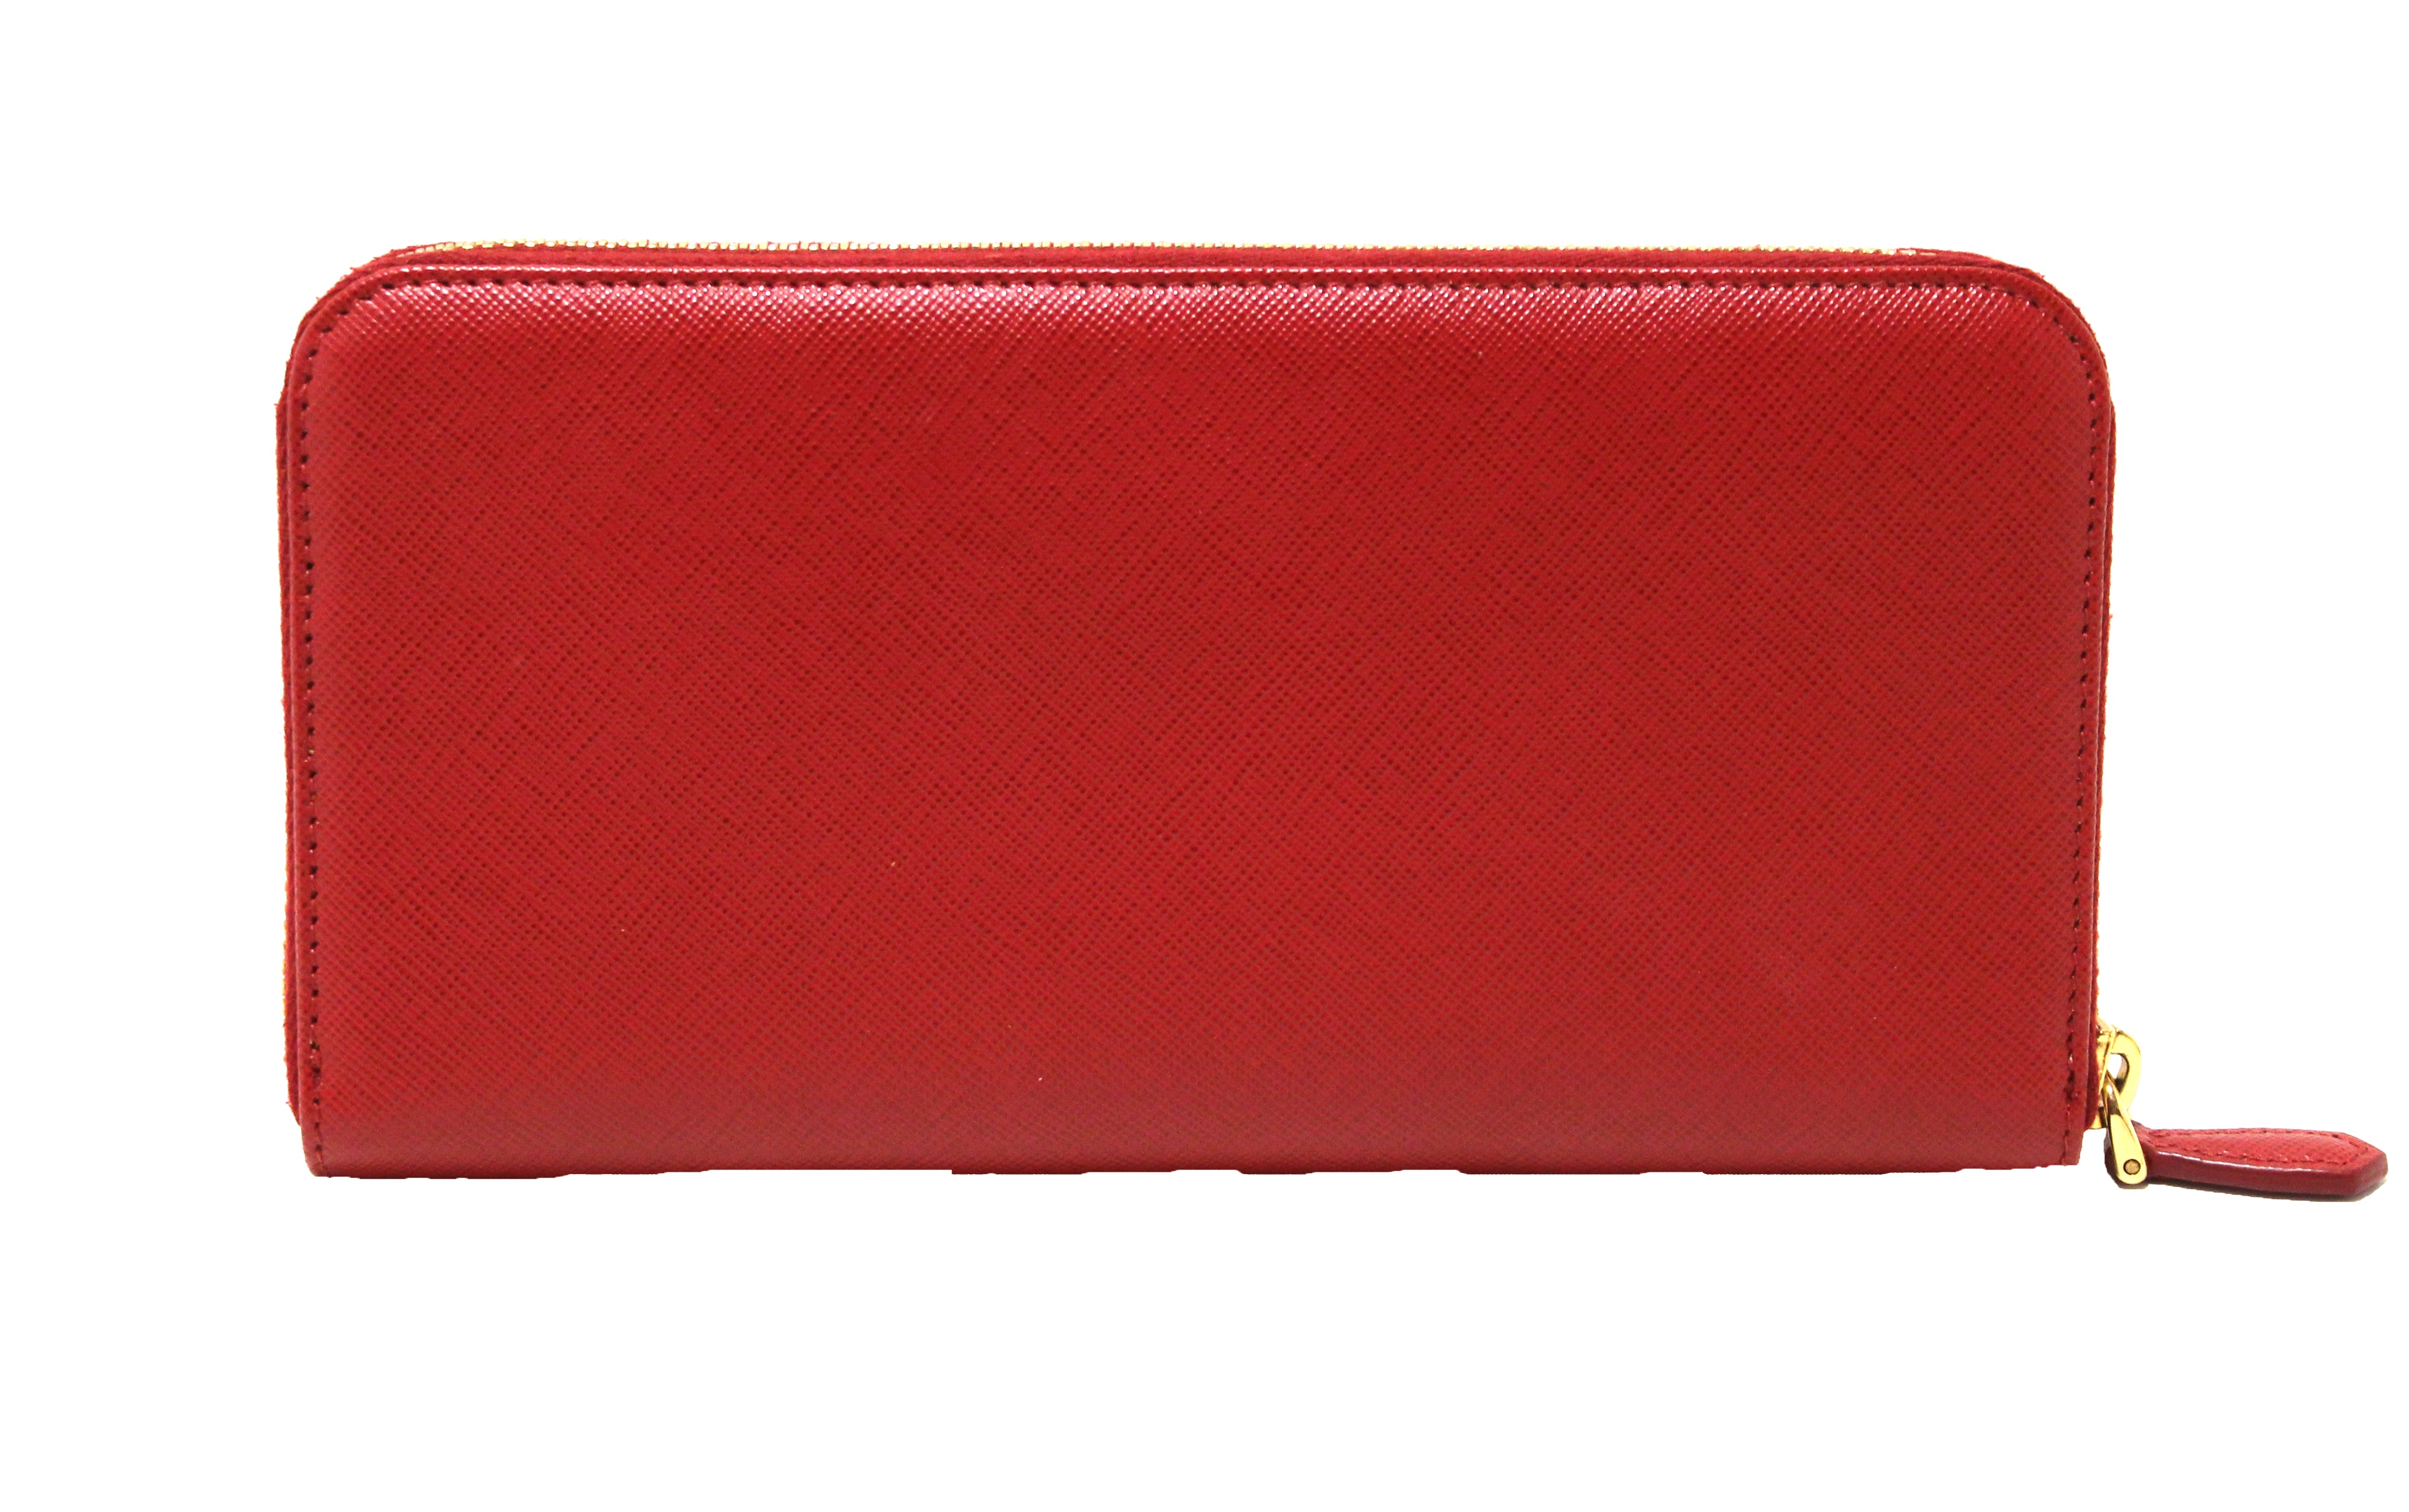 Authentic Prada Red Saffiano Leather Zippy Wallet